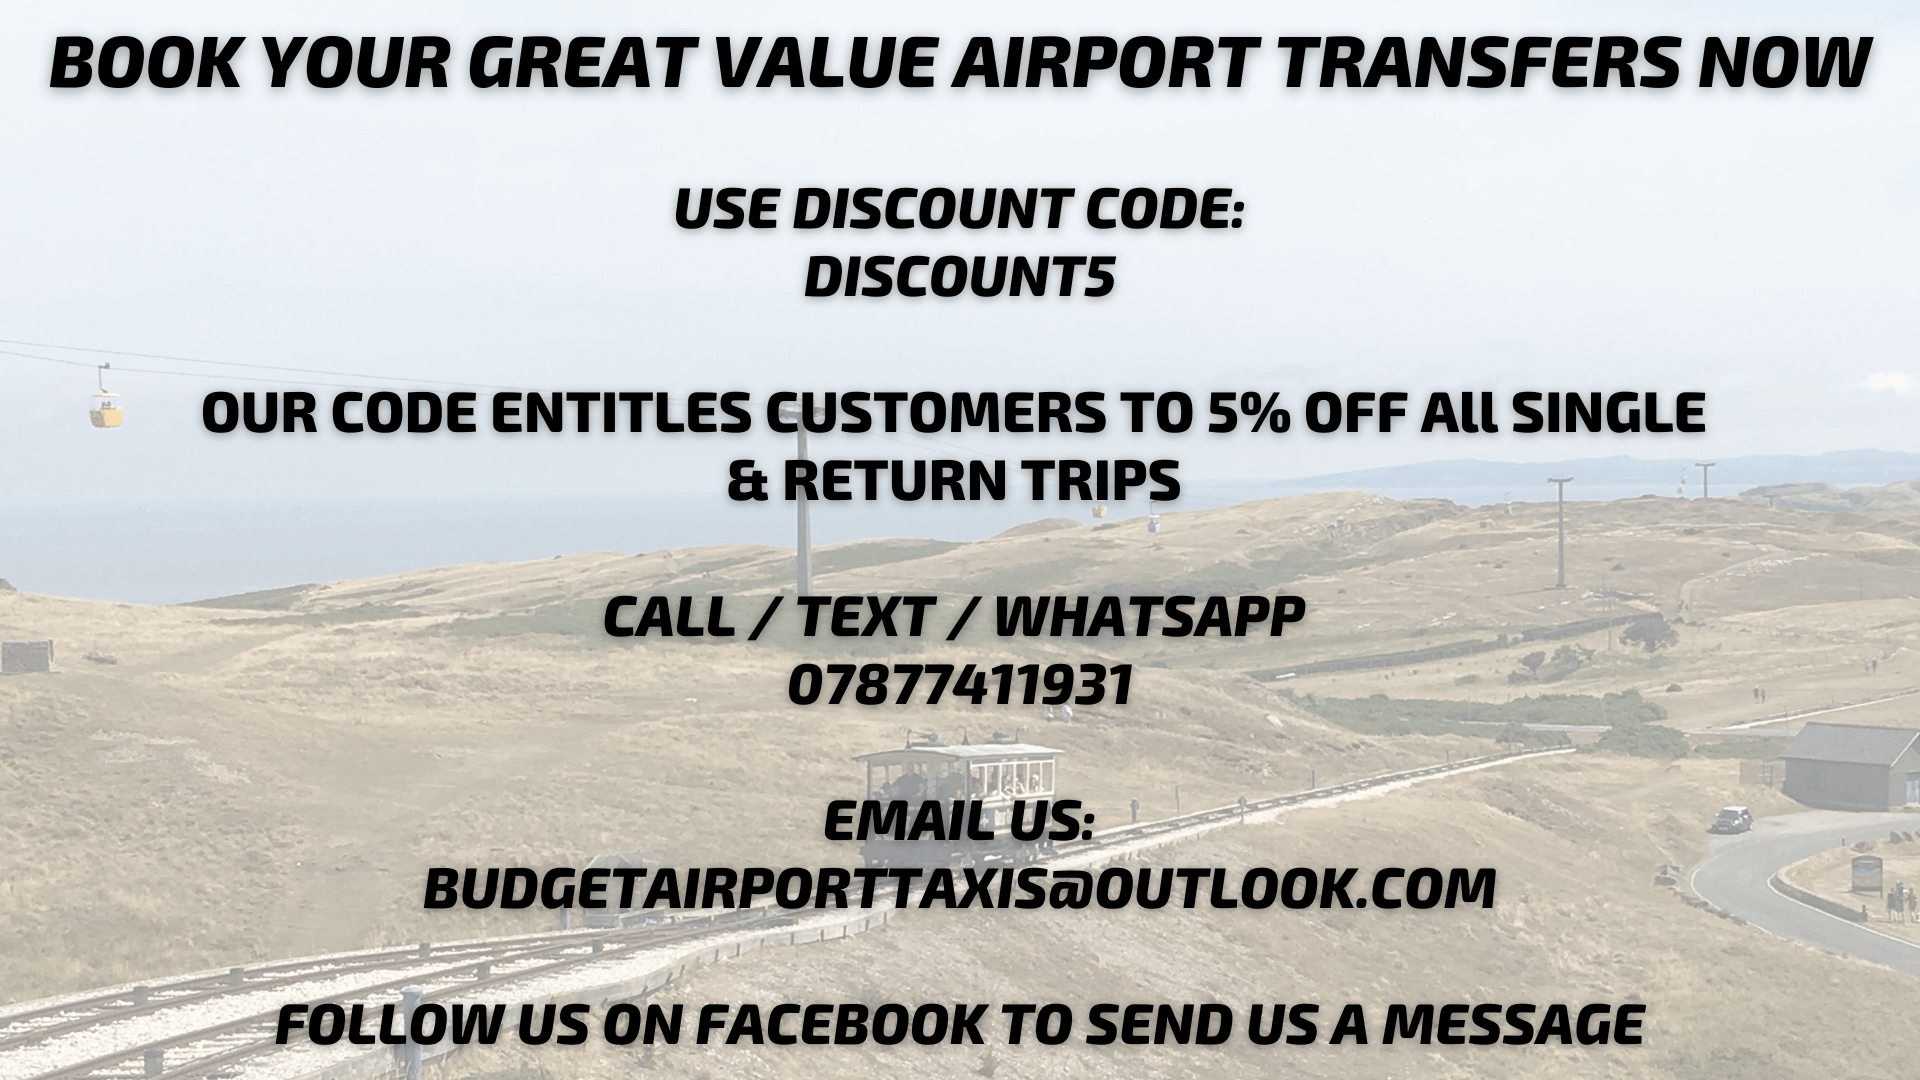 irvine glasgow airport taxi transfer 5% discount